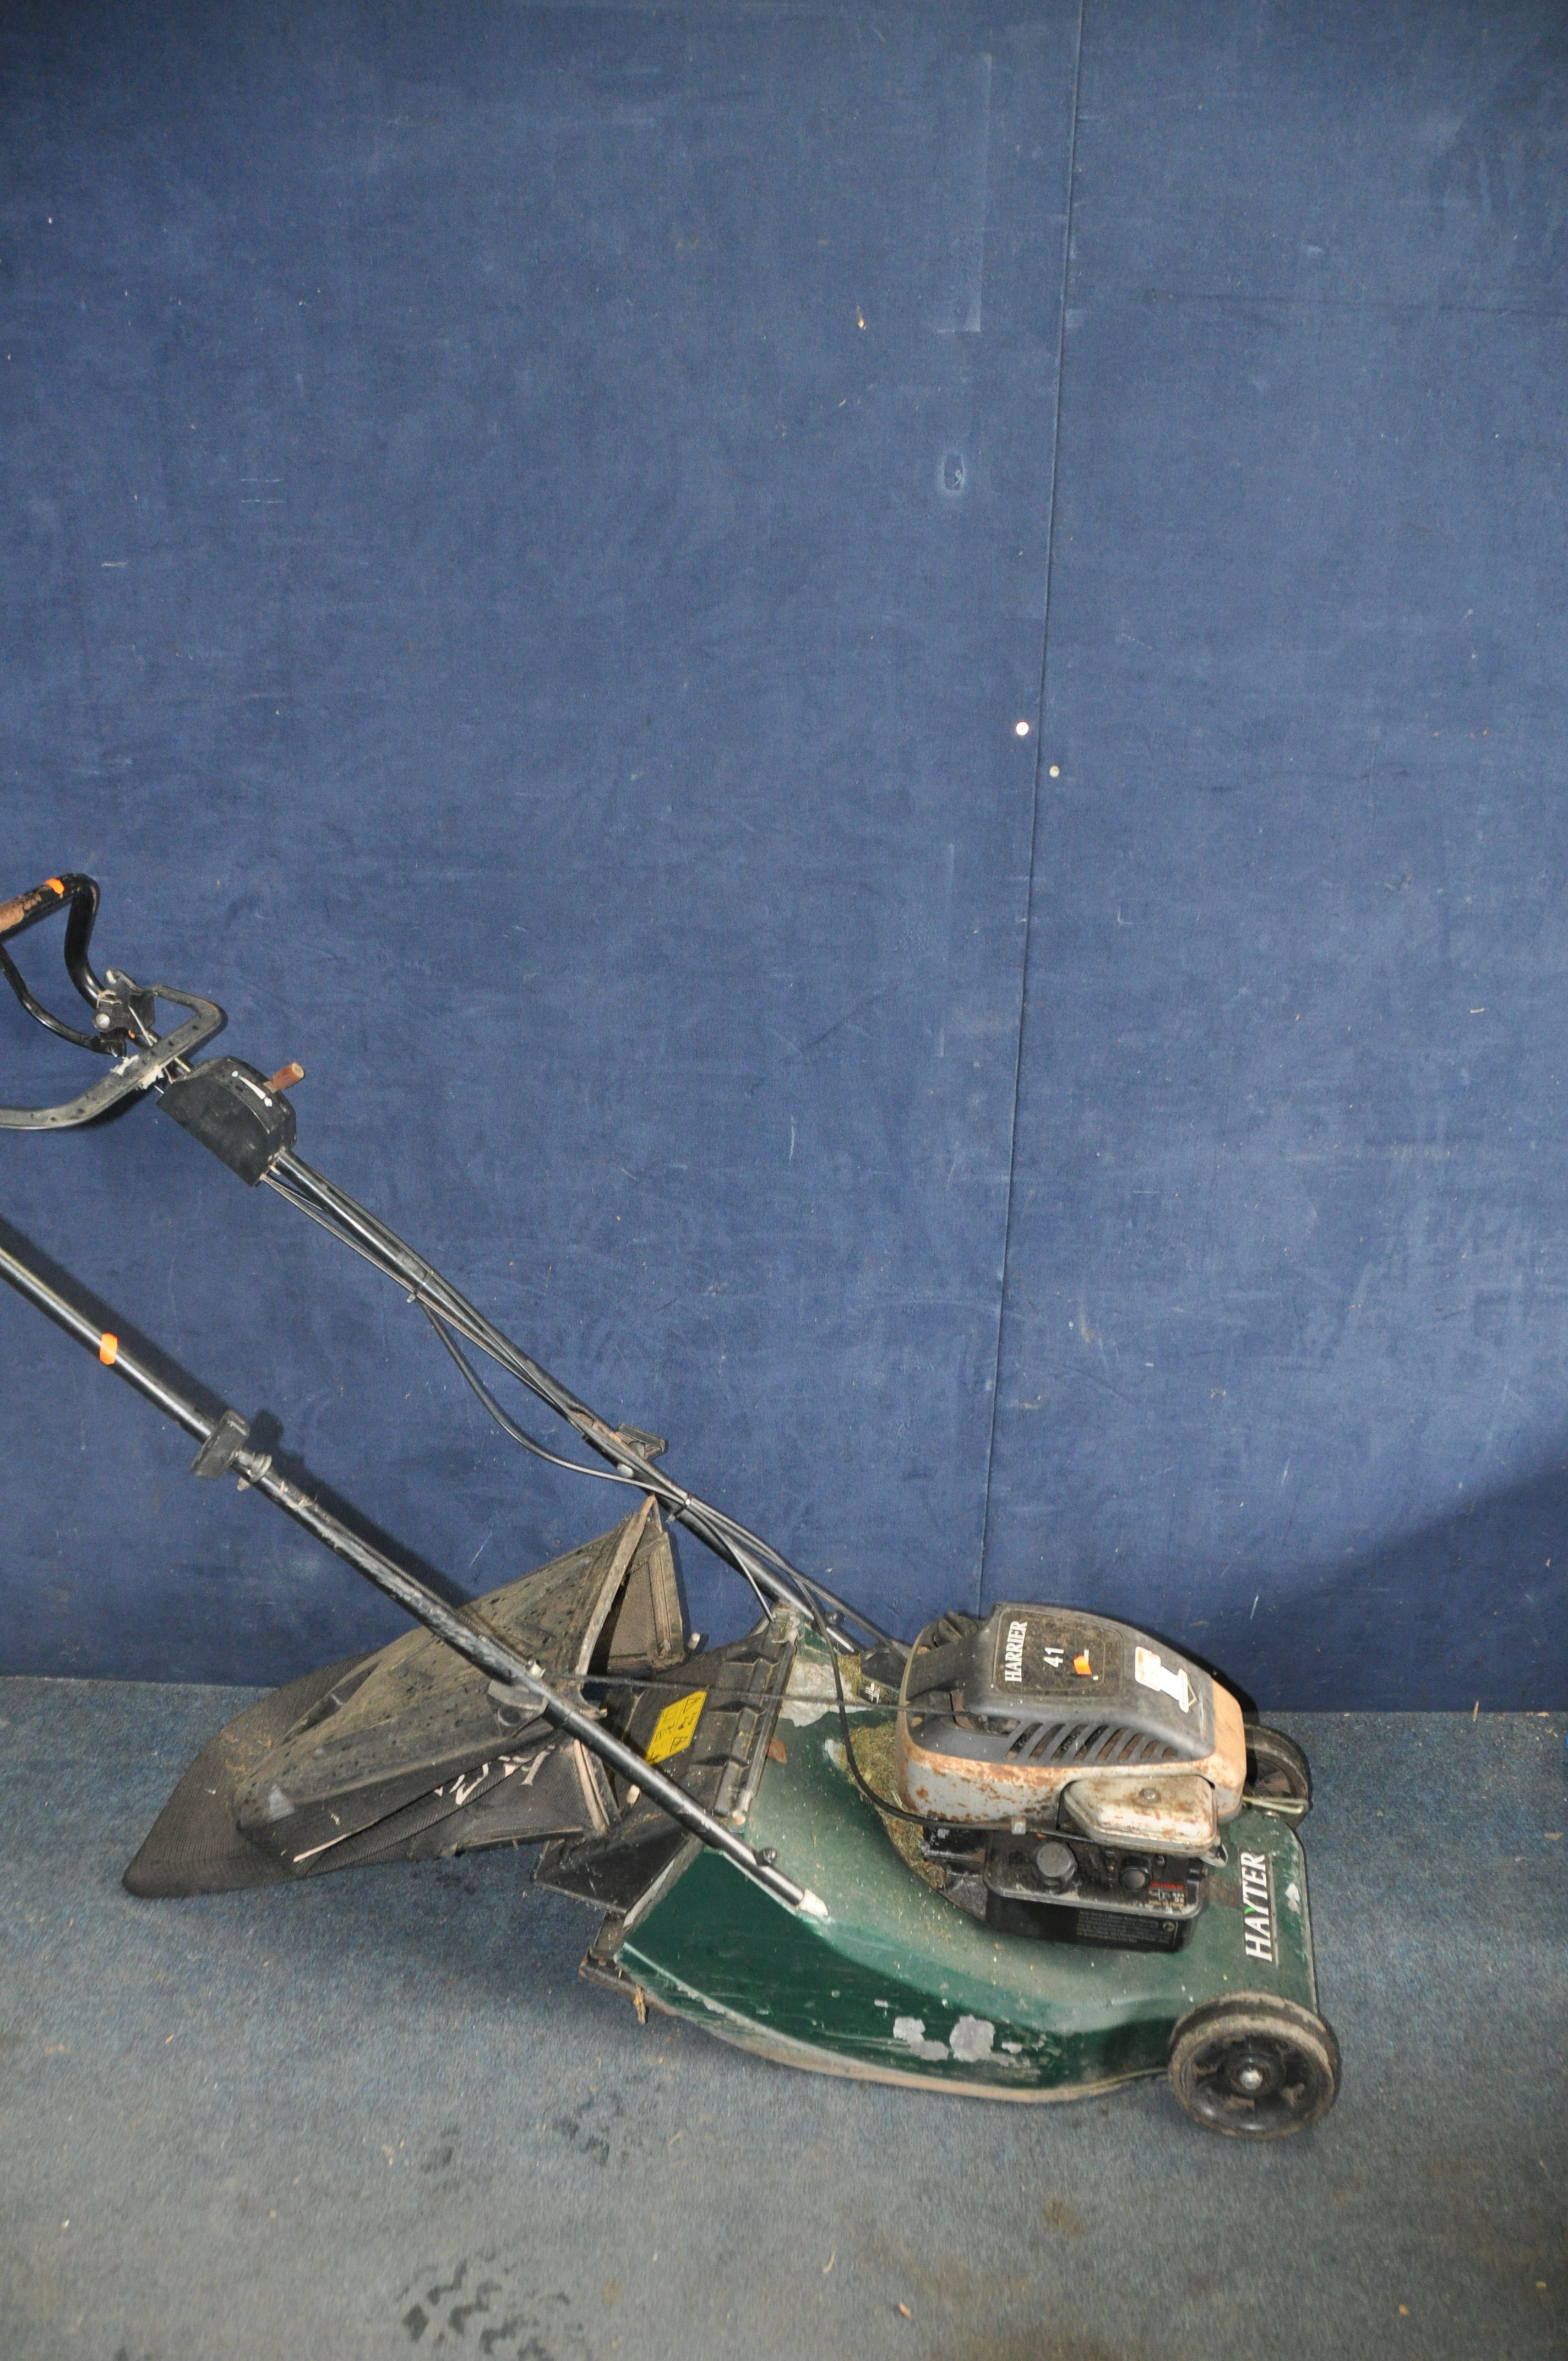 A HAYTER HARRIER 41 PETROL LAWN MOWER with grass box (UNTESTED but engine pulling freely)